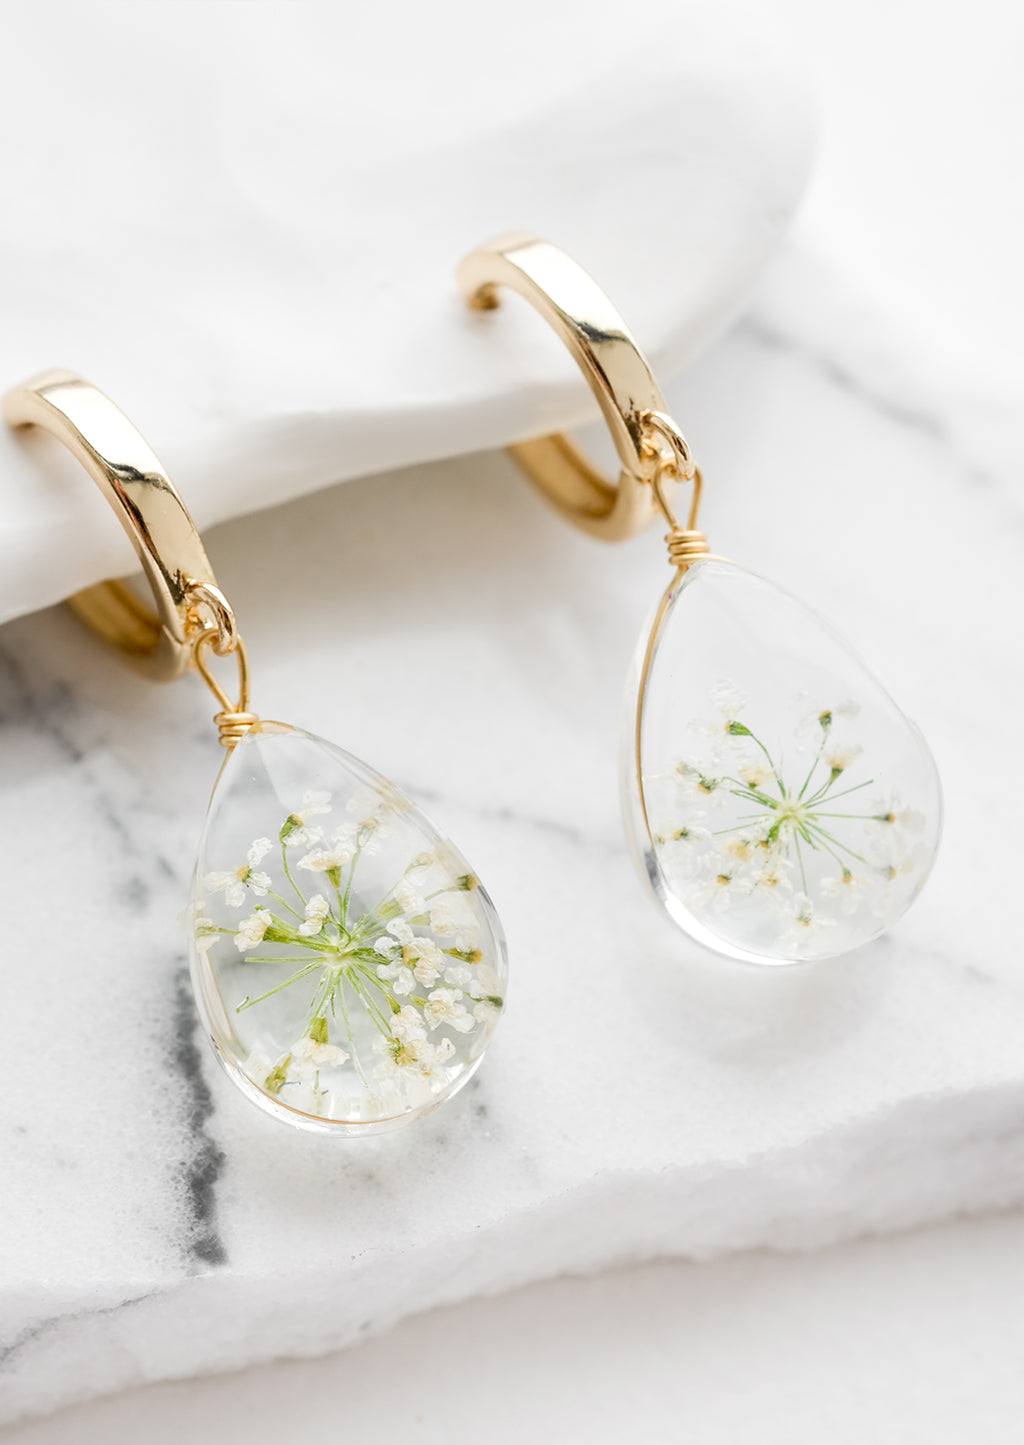 White / Green: A pair of earrings with gold huggie hoop and clear resin drop with encased white and green florals.